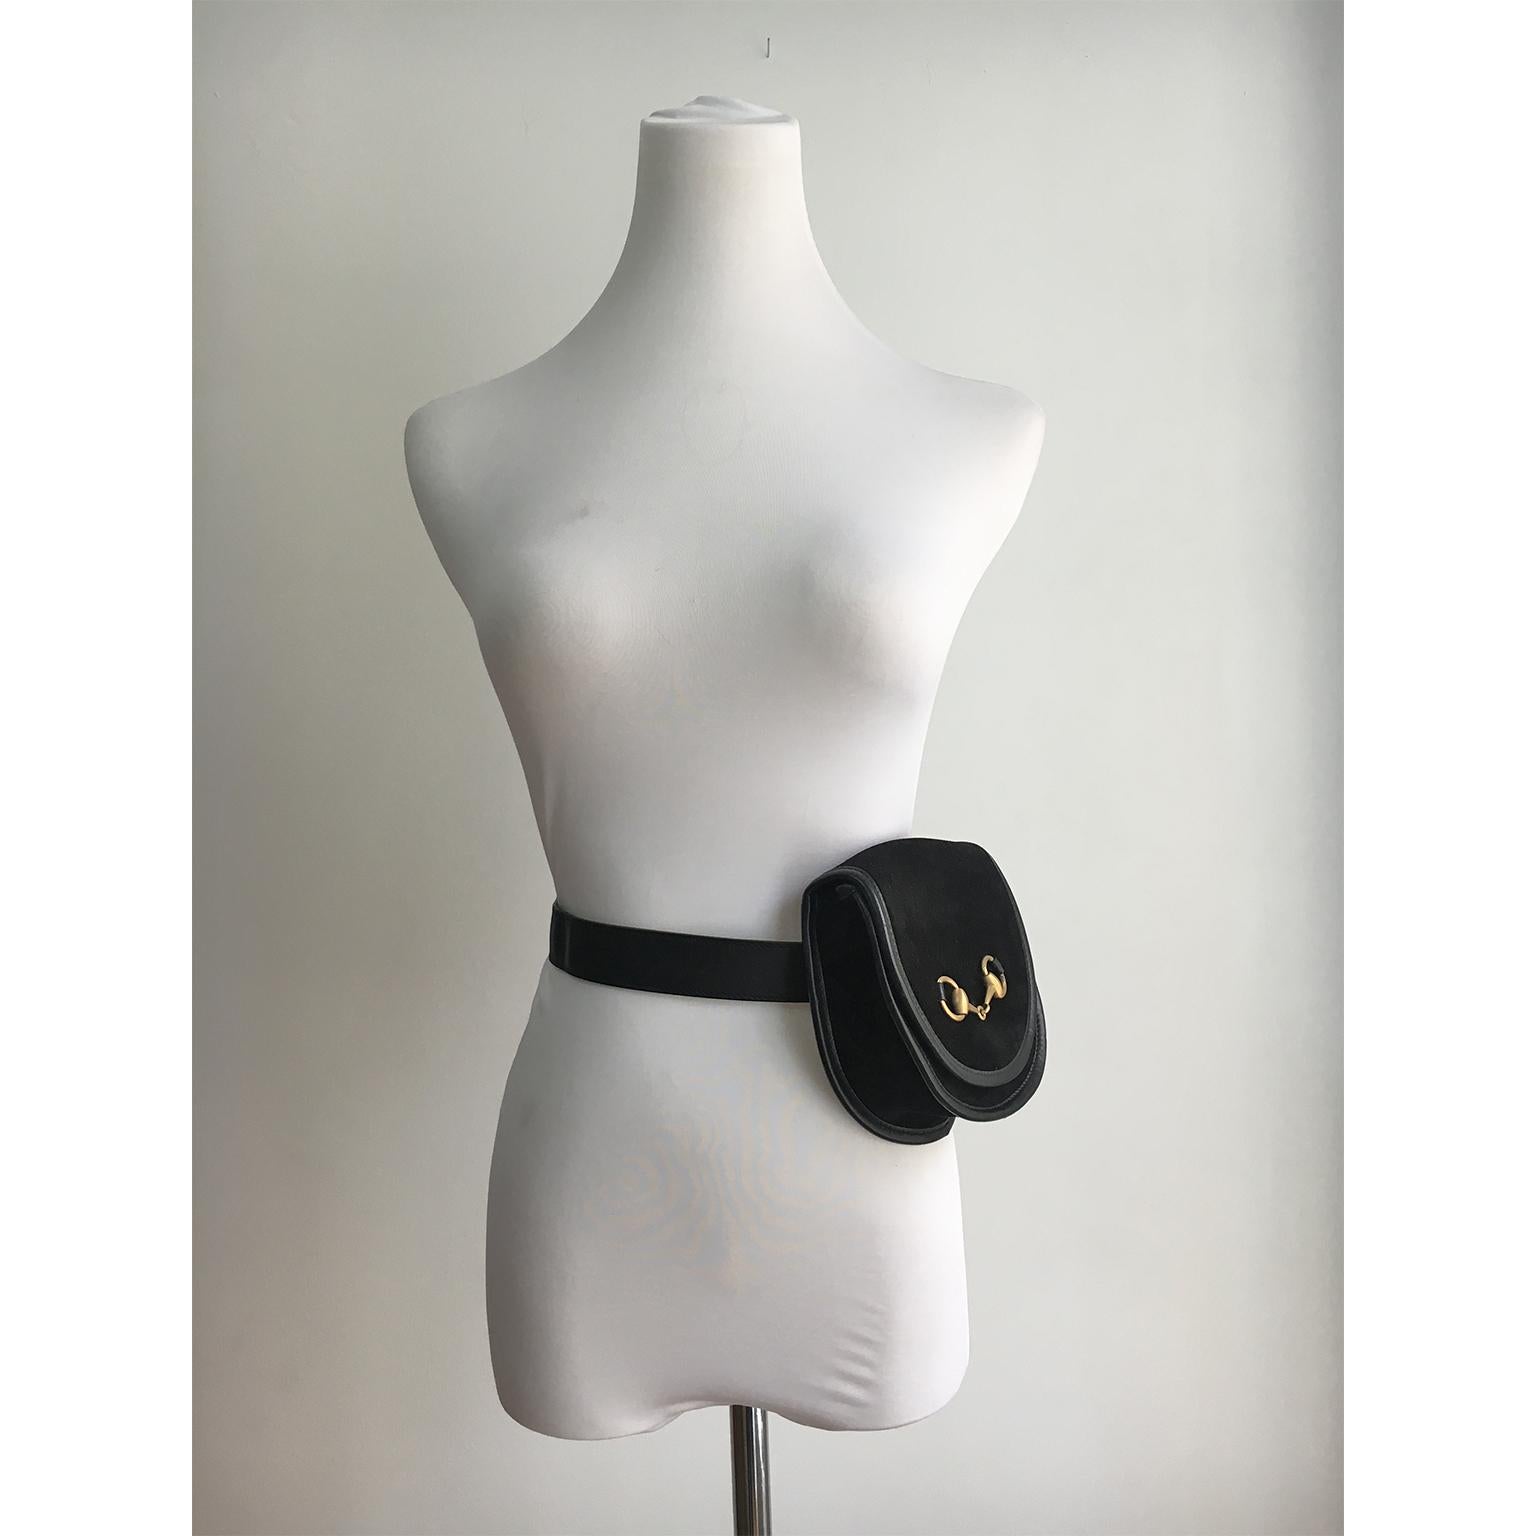 Vintage Gucci black suede golden Horsebit belt bag Coin Pouch from circa 1980s. Matte gold tone horsebit and magnetic clasp closure with gucci logo embossed.  Exterior is in excellent condition. Originally the interior was made out of plastic